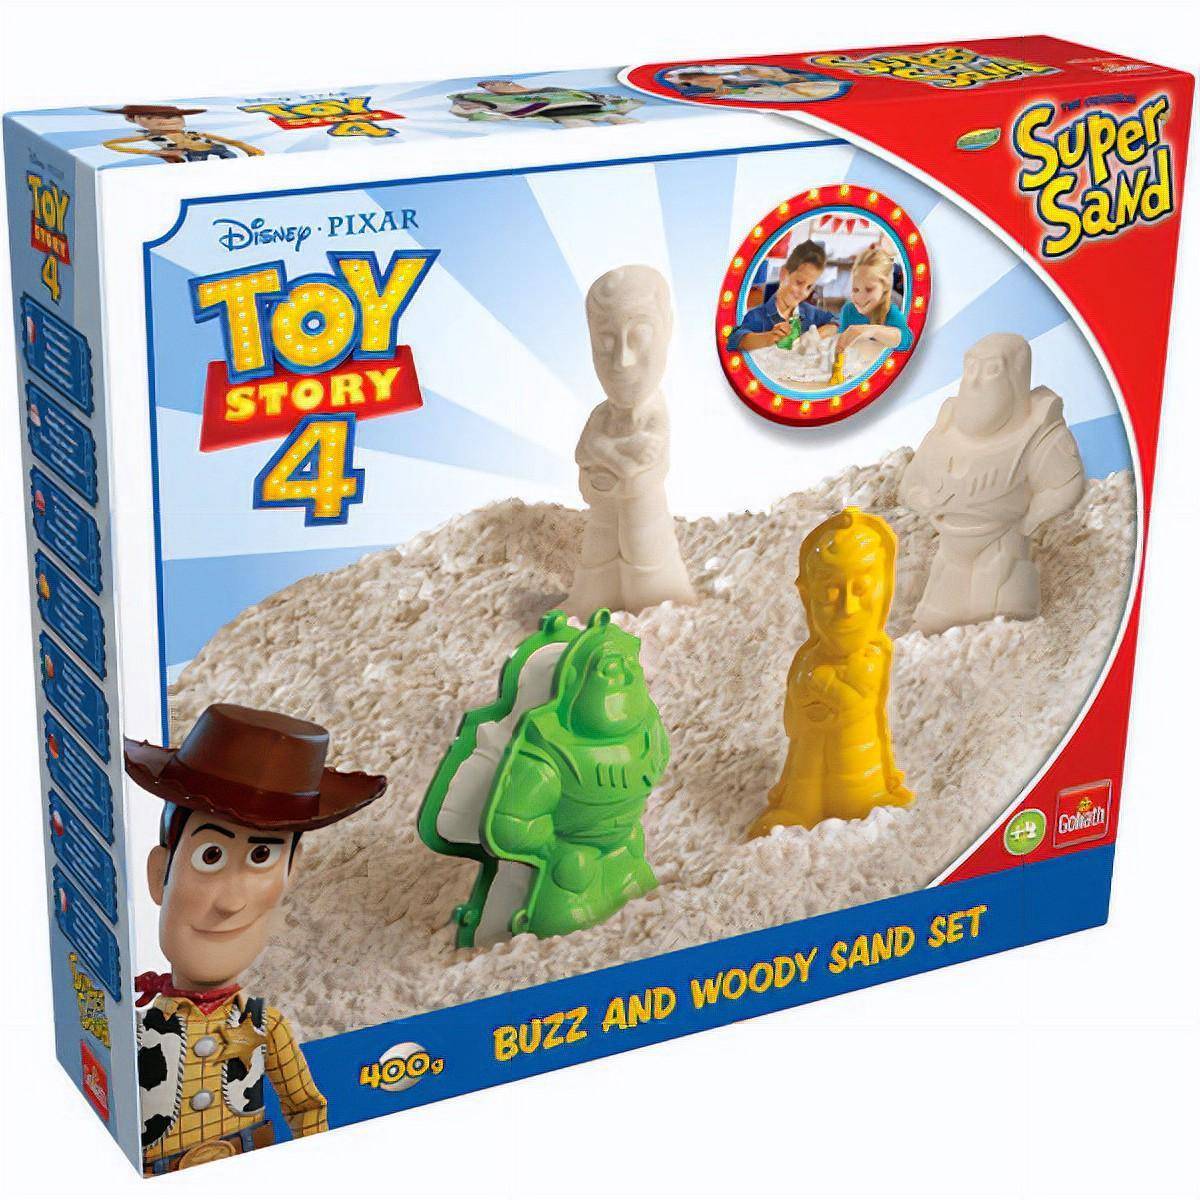 Super Sand Toy Story 4